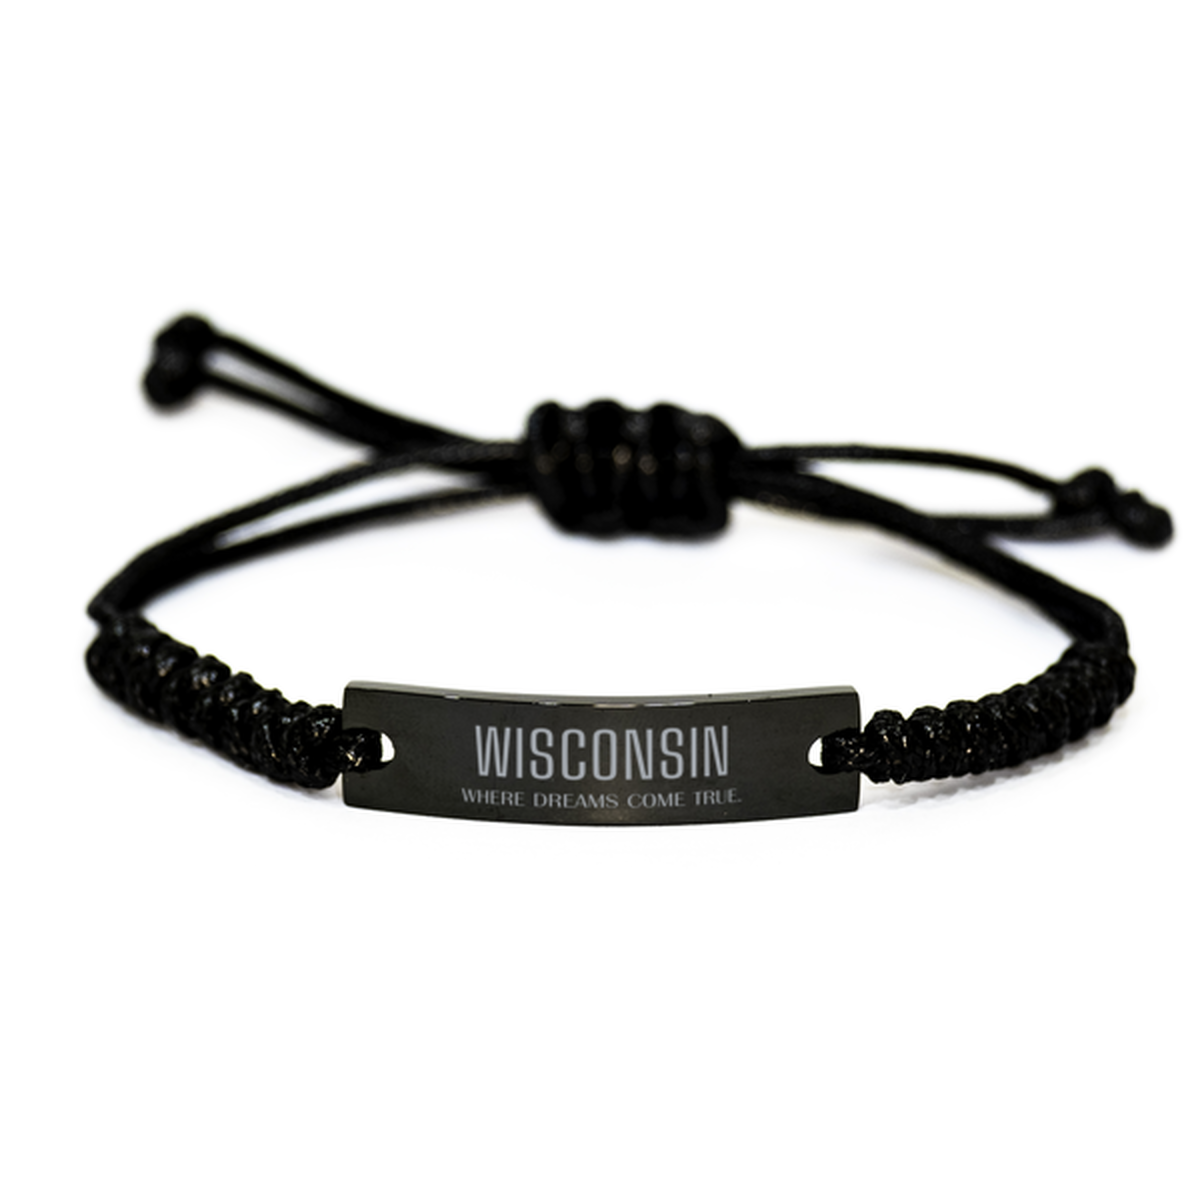 Love Wisconsin State Black Rope Bracelet, Wisconsin Where dreams come true, Birthday Inspirational Gifts For Wisconsin Men, Women, Friends